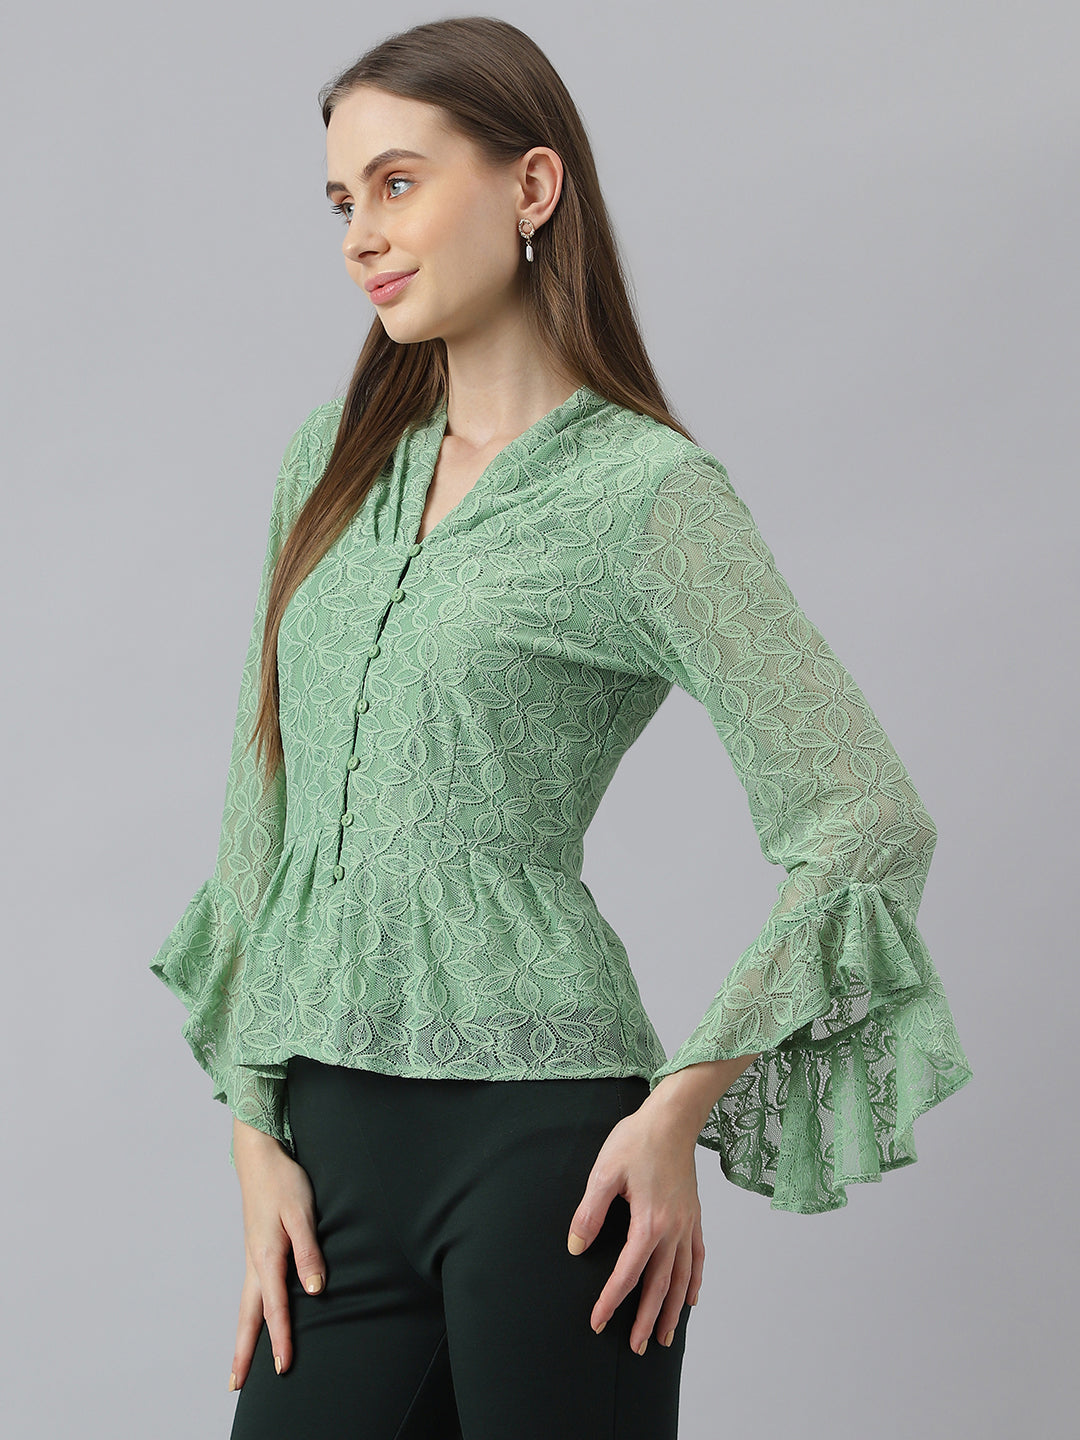 Green 3/4 Sleeve V-Neck Solid Women Blouse Top for Casual